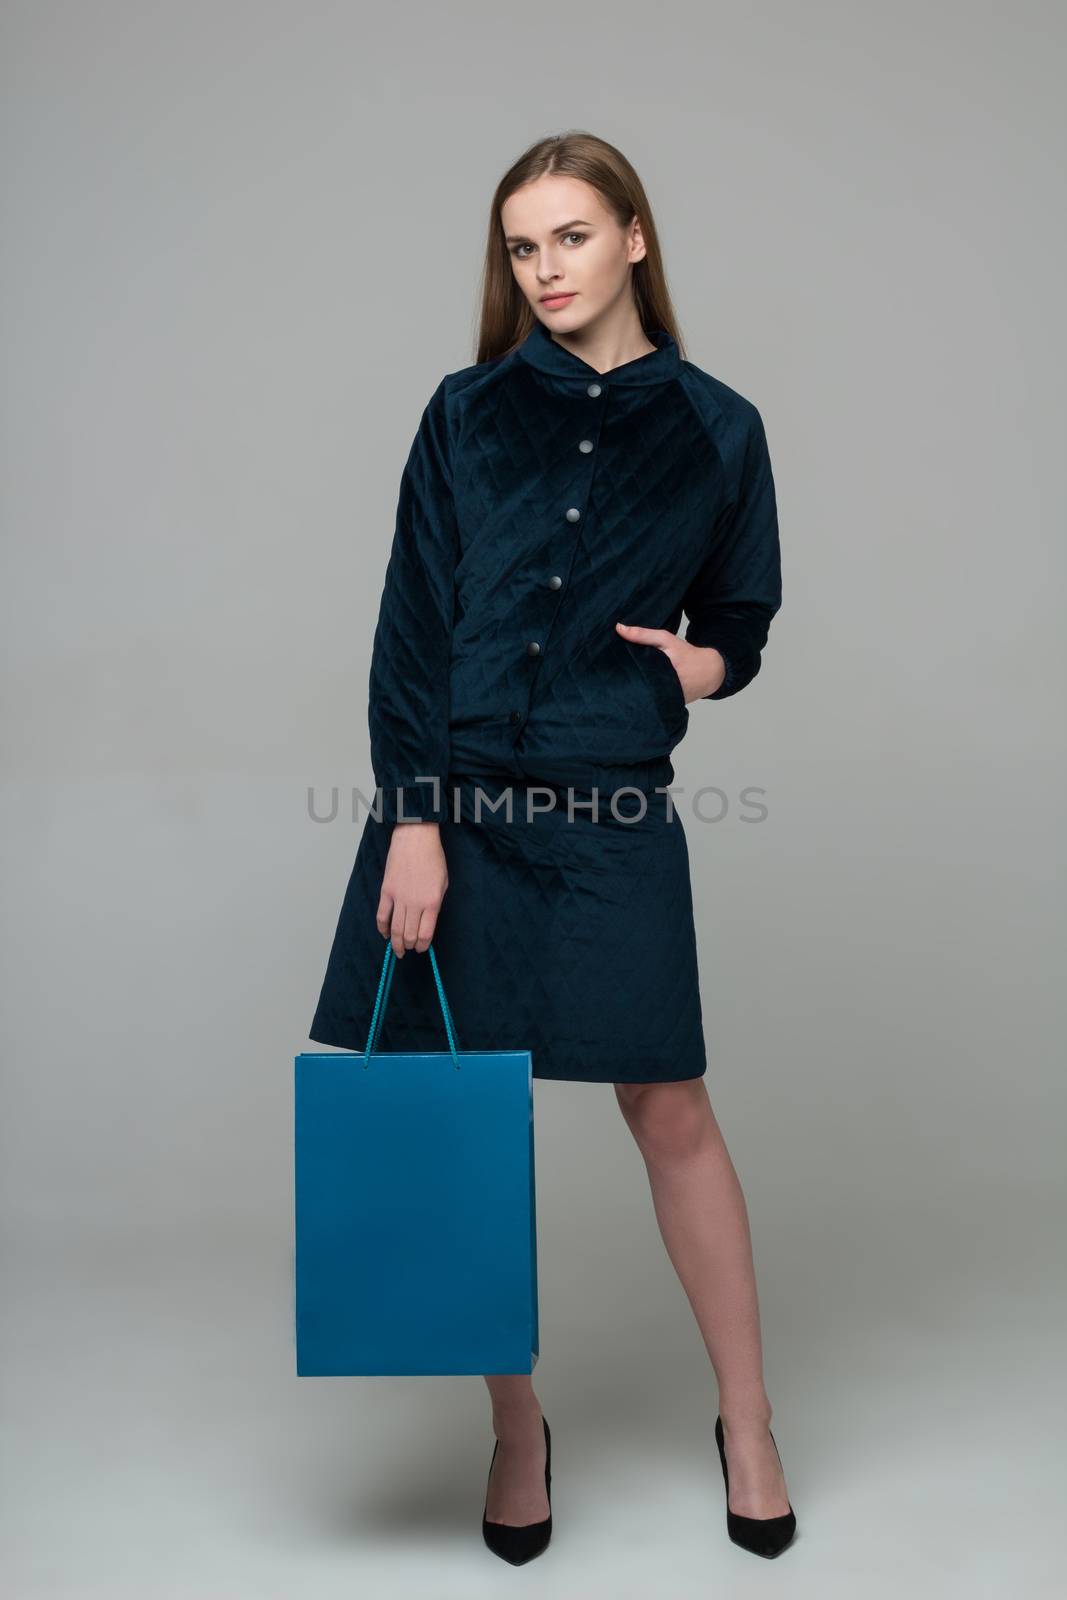 Young model long-haired blond girl in dark skirt suit stands holding blue shopping package